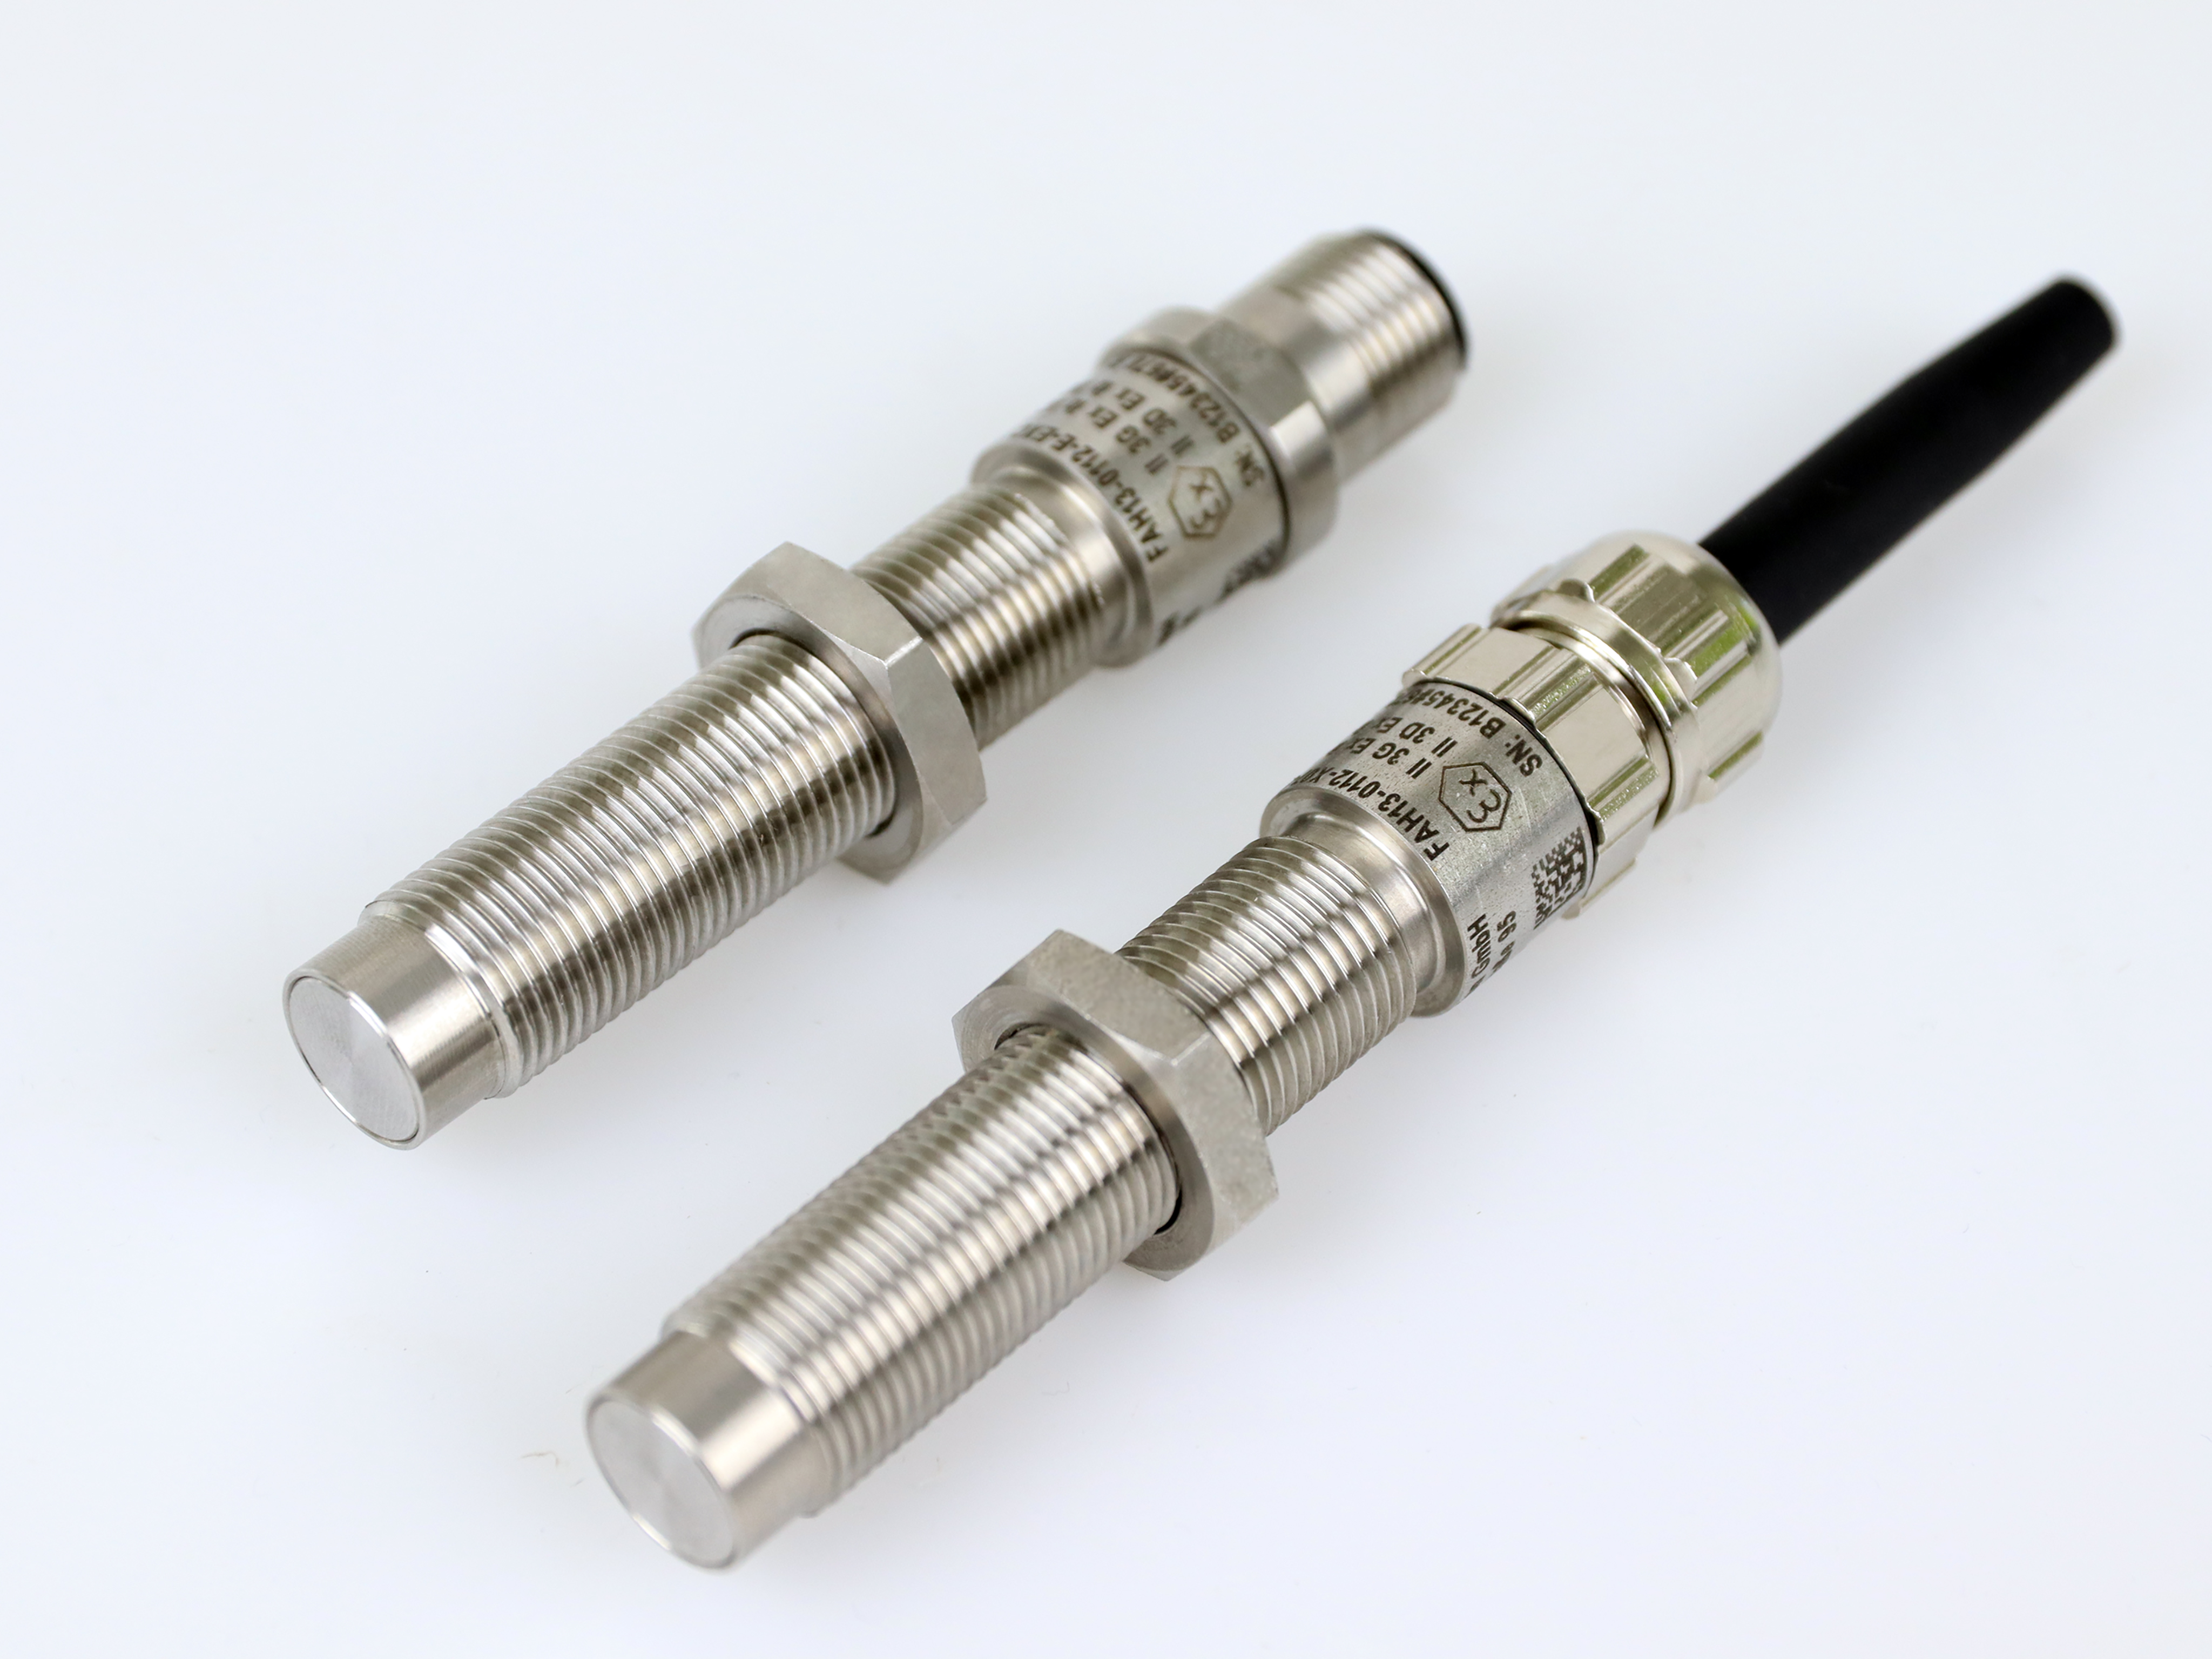 The image shows two threaded stainless steel speed sensors, one with a cable end ond the other witha connector plug laying on a grey background